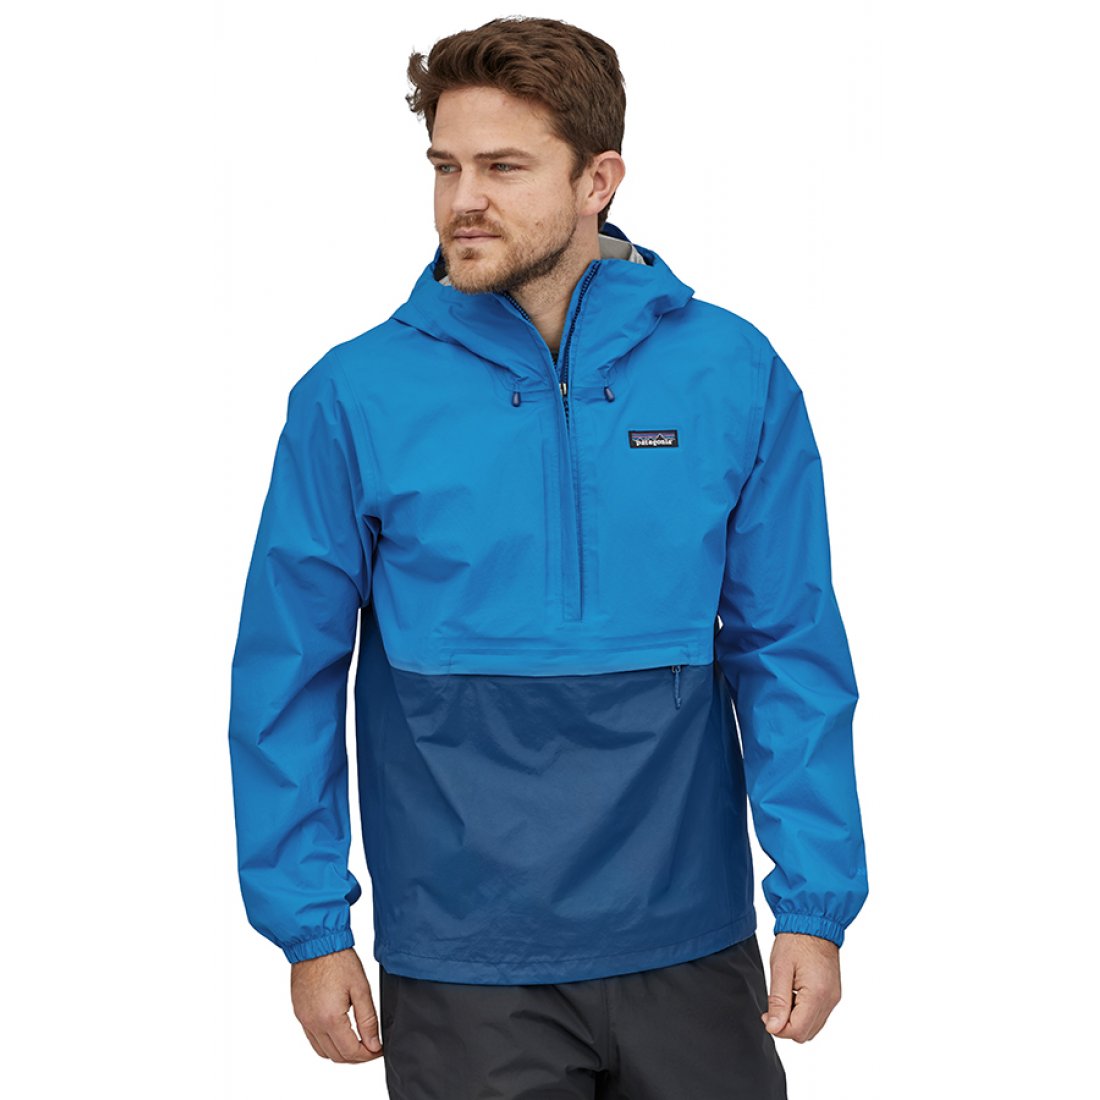 Patagonia Men's Torrentshell Pullover - Andes Blue - Patagonia